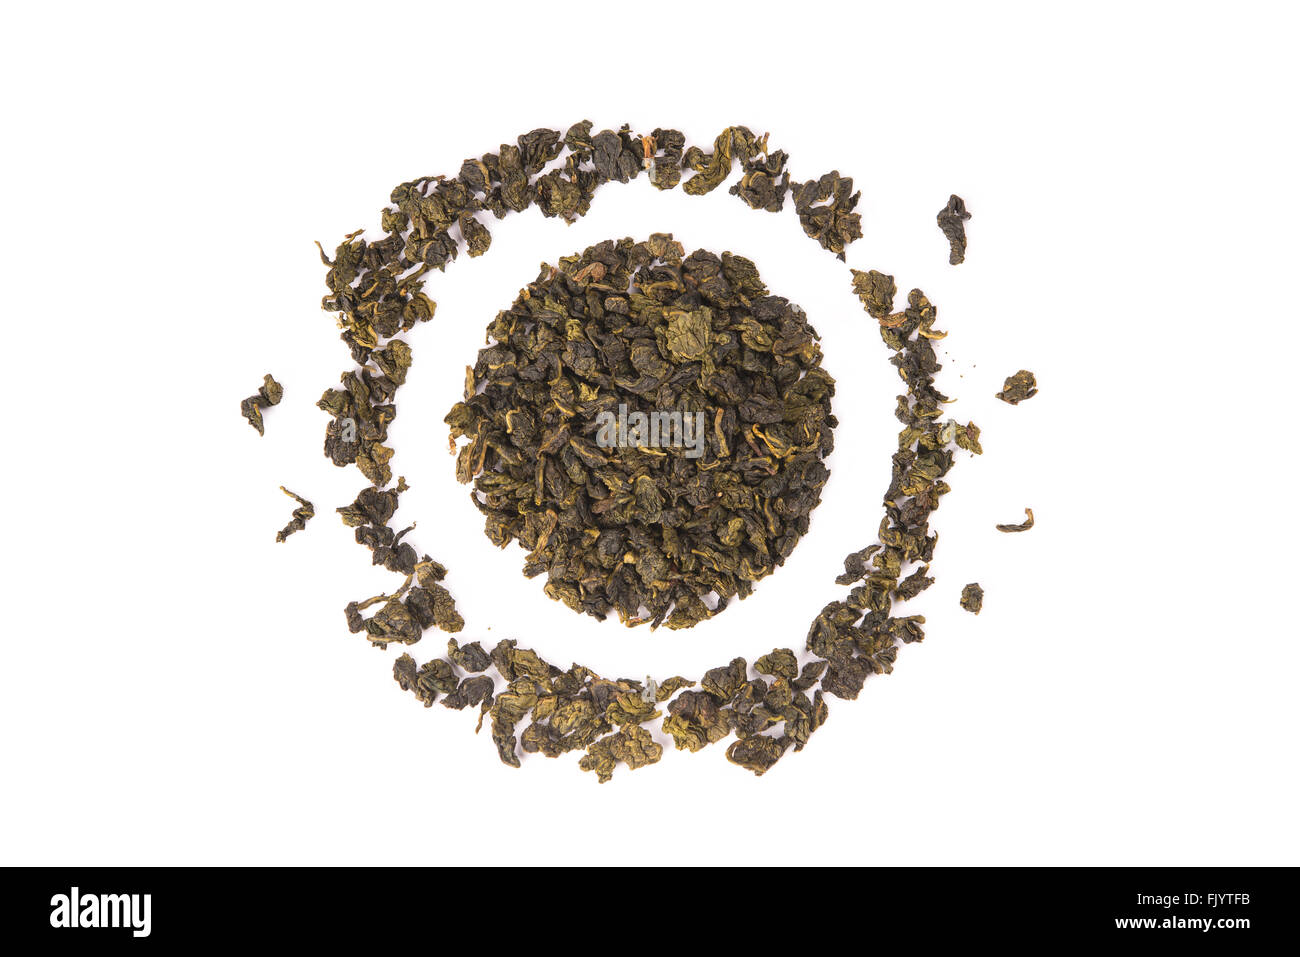 Tie Guan Yin Oolong tea, high angle view isolated on white background Stock Photo